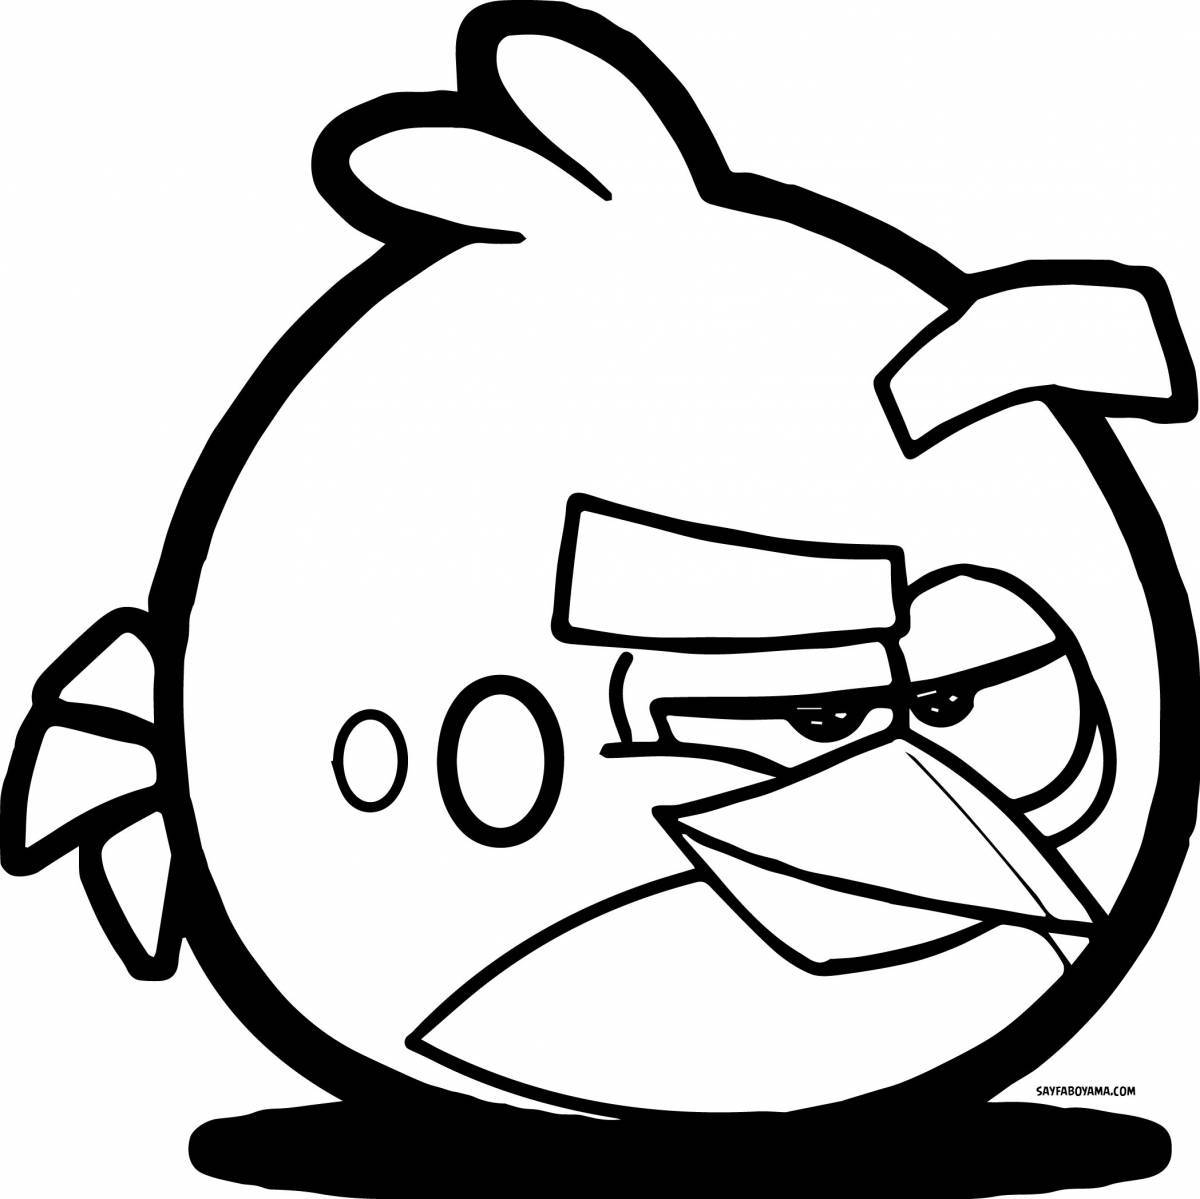 Angry birds humorous coloring book